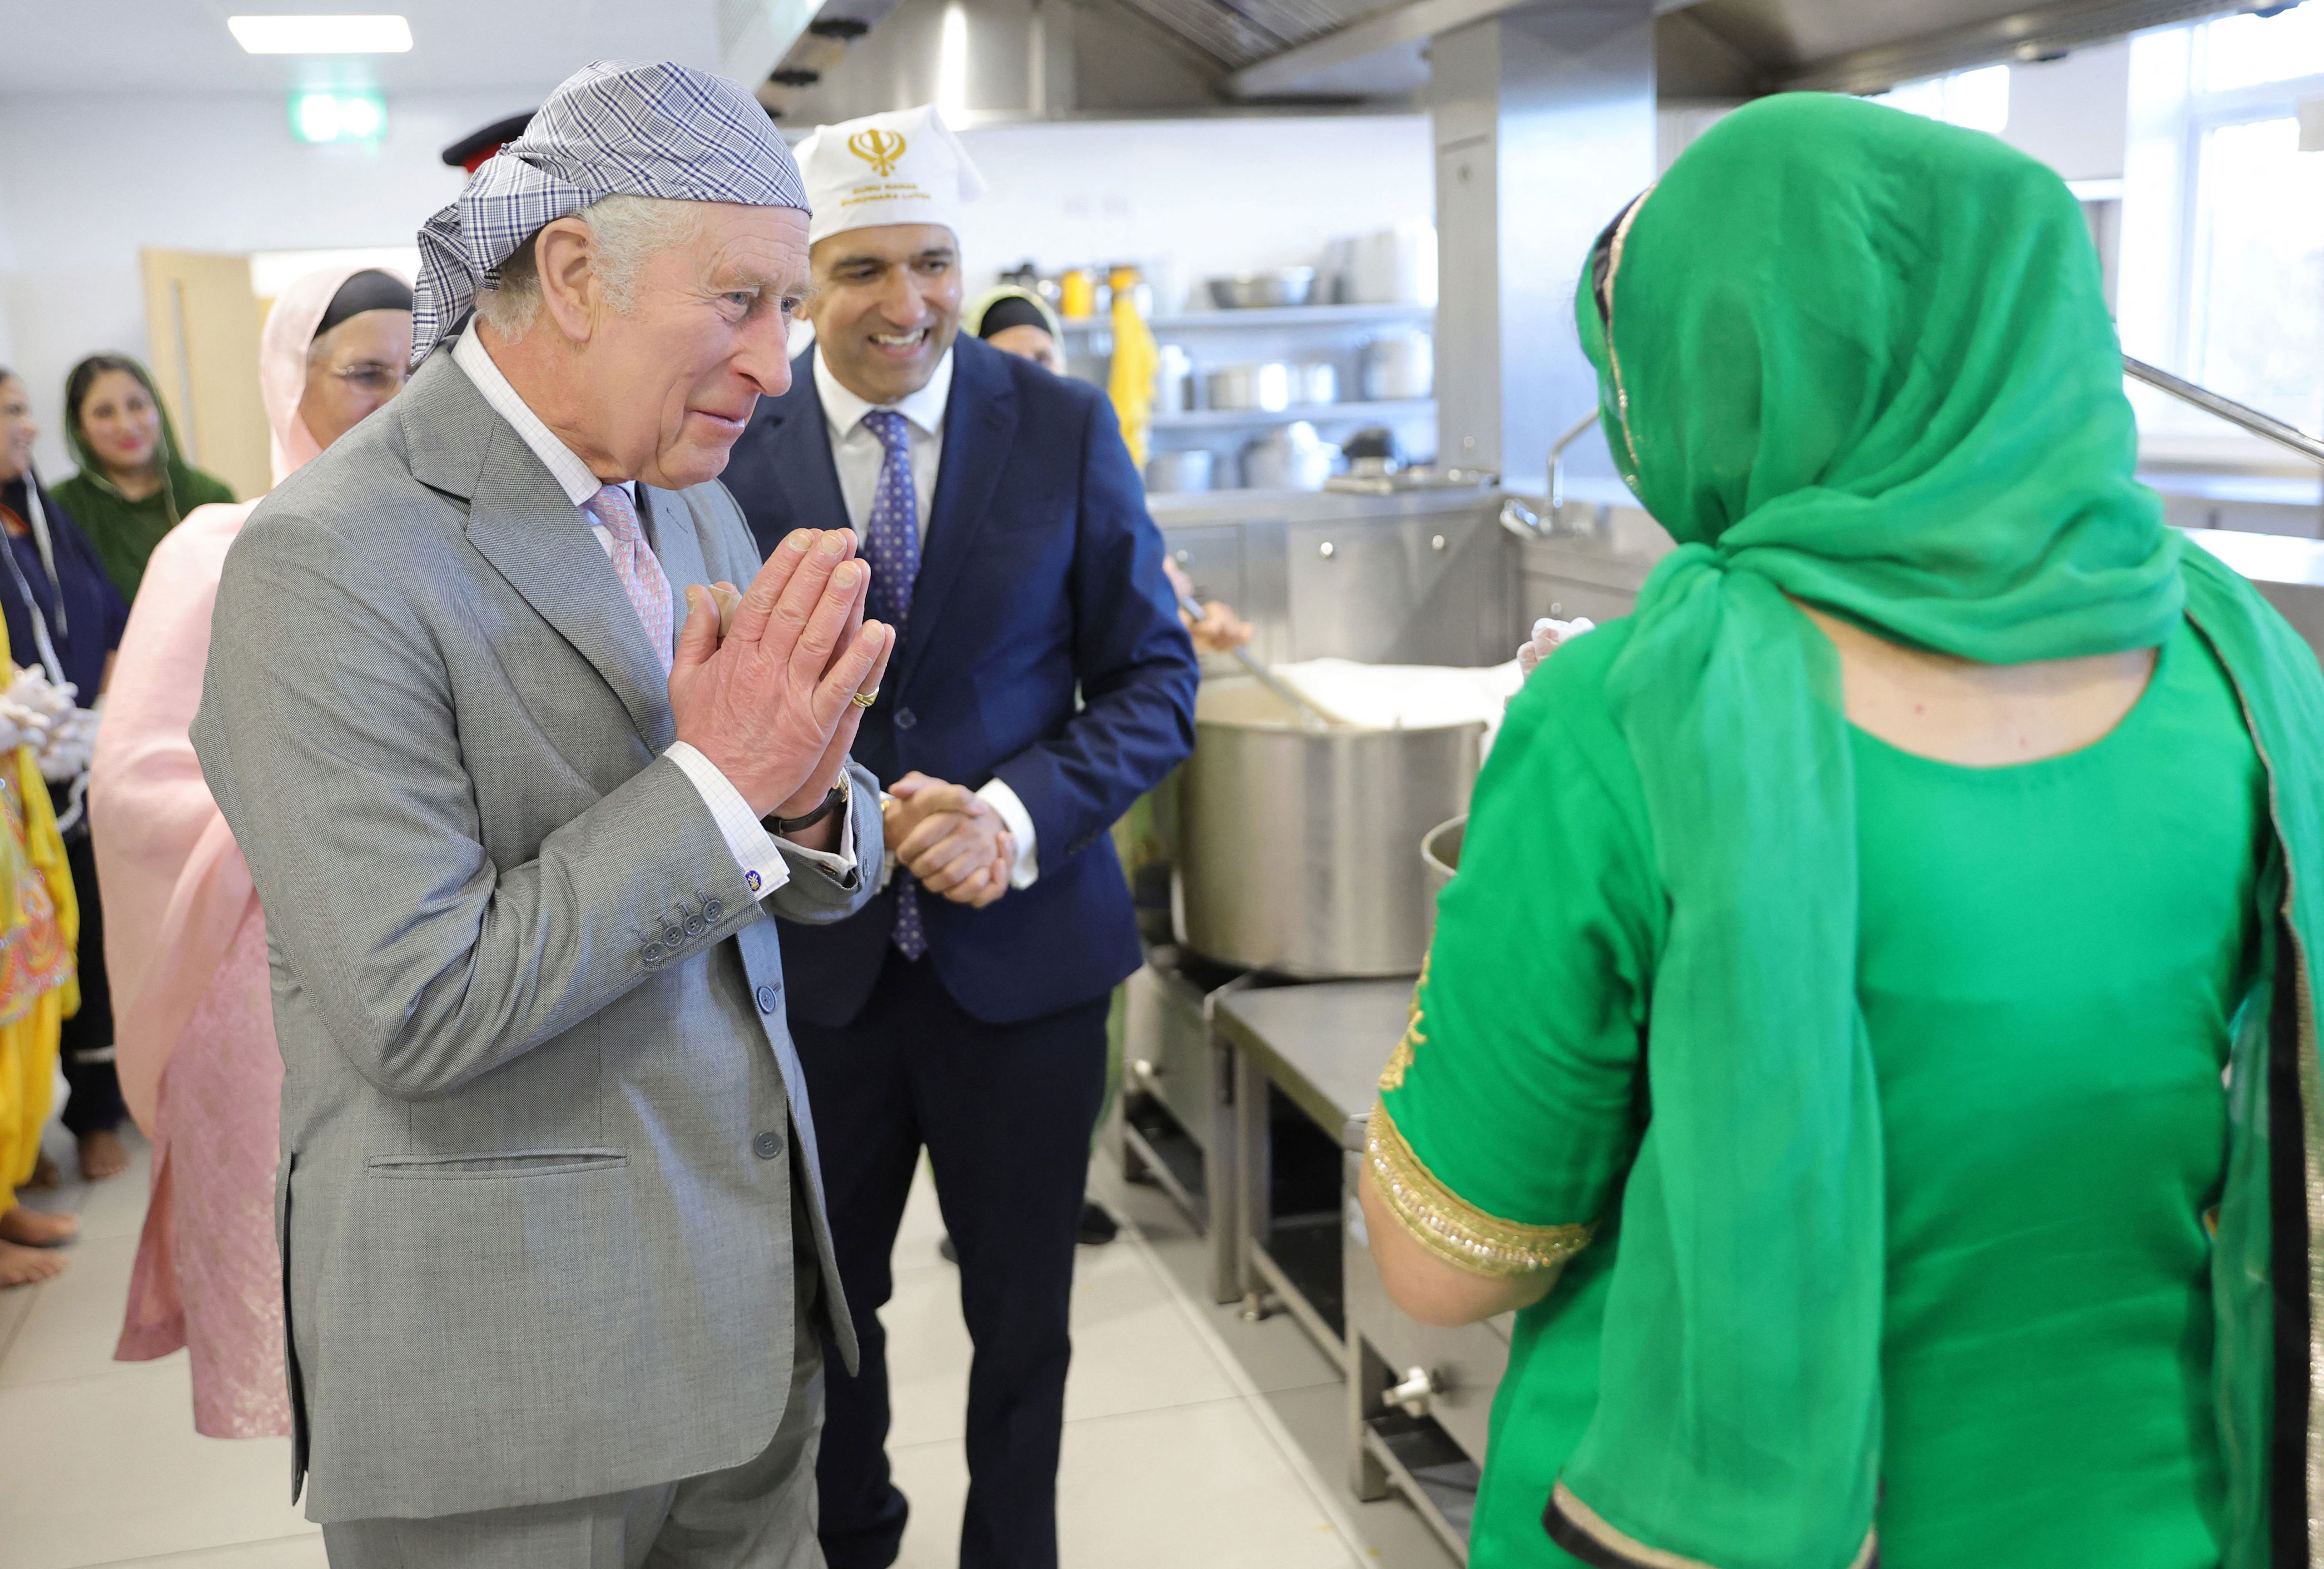 <p>King Charles III made a traditional namaste greeting gesture as he spoke to volunteers at the Luton Sikh Soup Kitchen Stand during his visit to the newly built Guru Nanak Gurdwara -- which provides Sikh religious teaching and practice for members of the community as well as voluntary social services for the elderly, youth and other groups -- in Luton, England, on Dec. 6, 2022.</p>